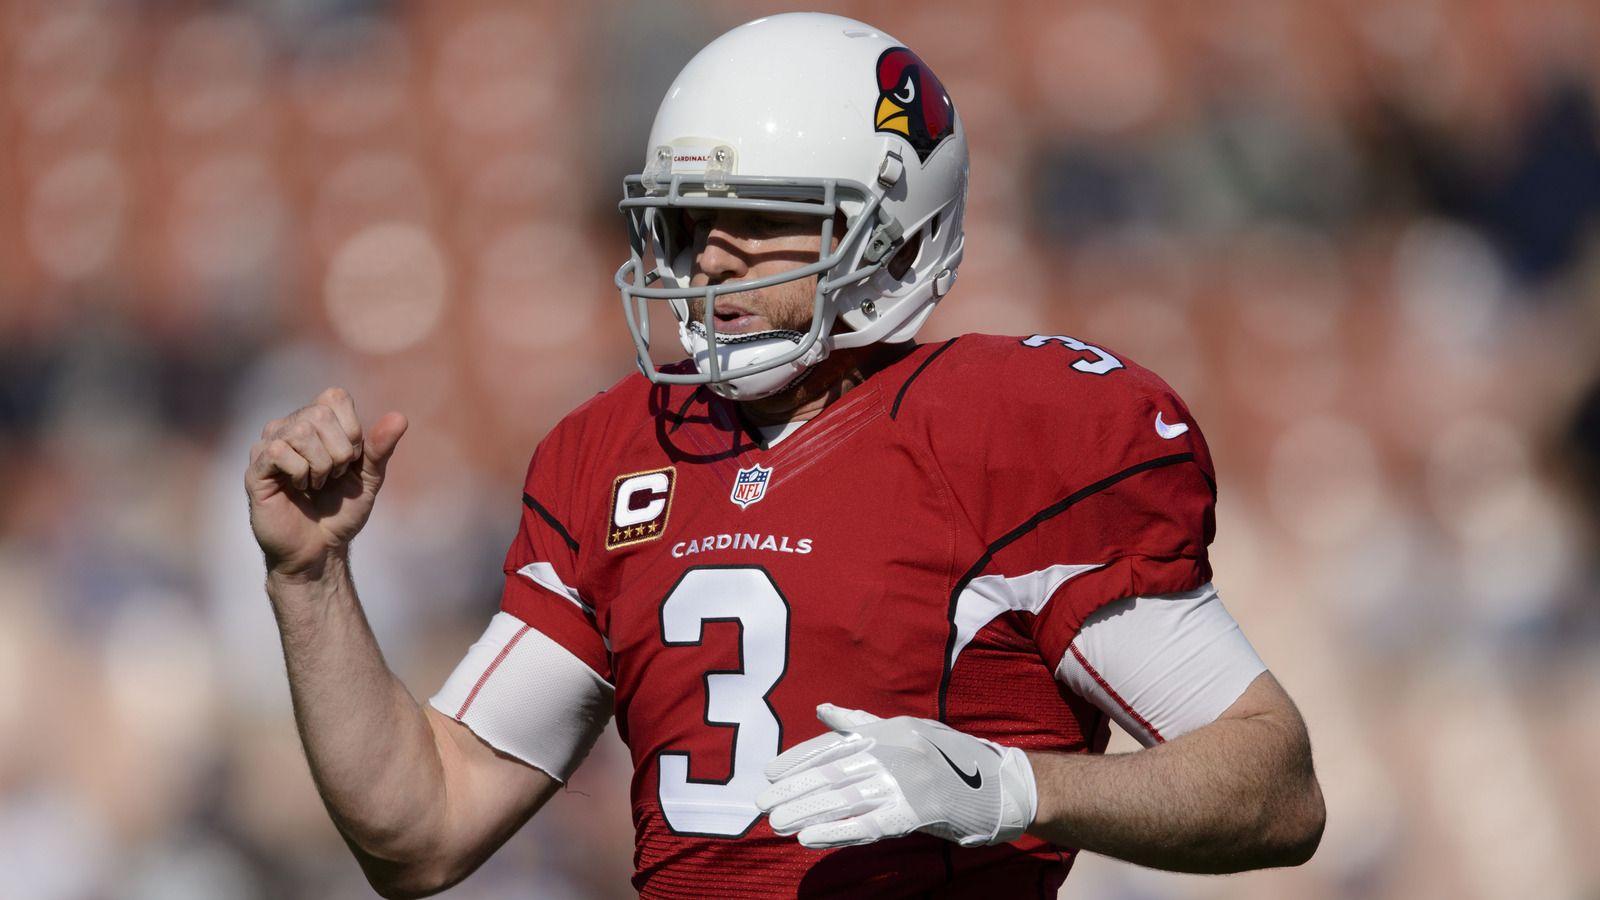 Carson Palmer unsure if he will play beyond 2017